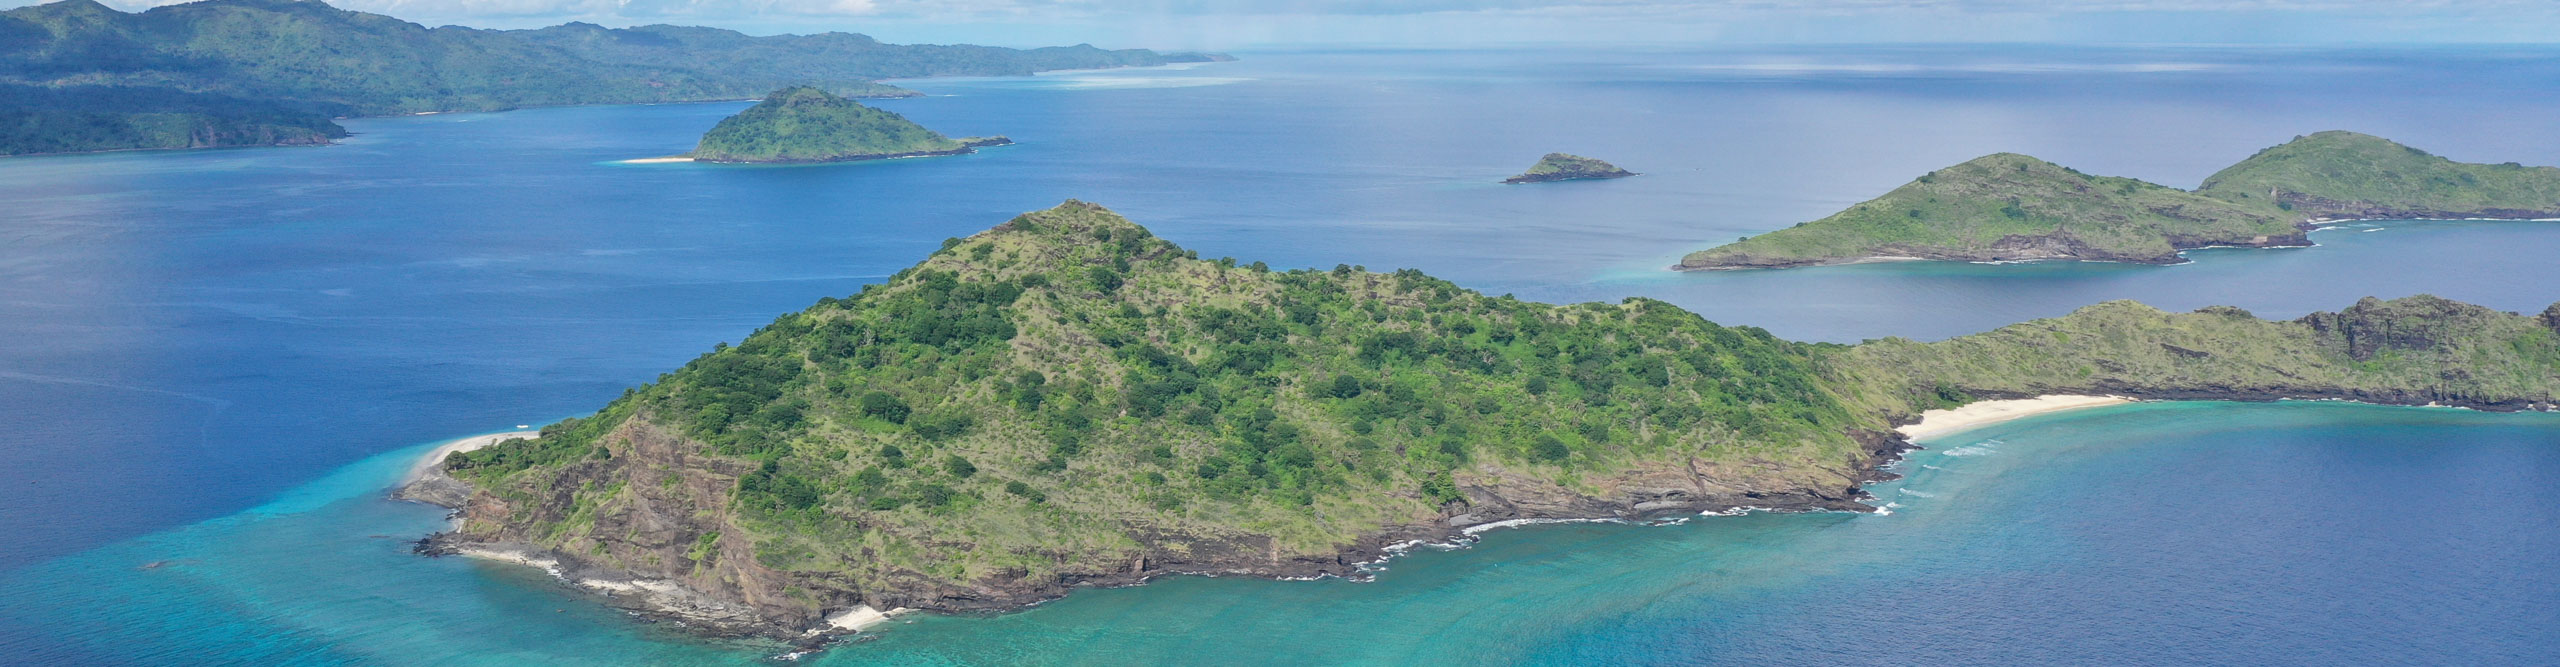 Aerial view of the Comoros Islands surrounded by bright blue water, off the coast of East Africa